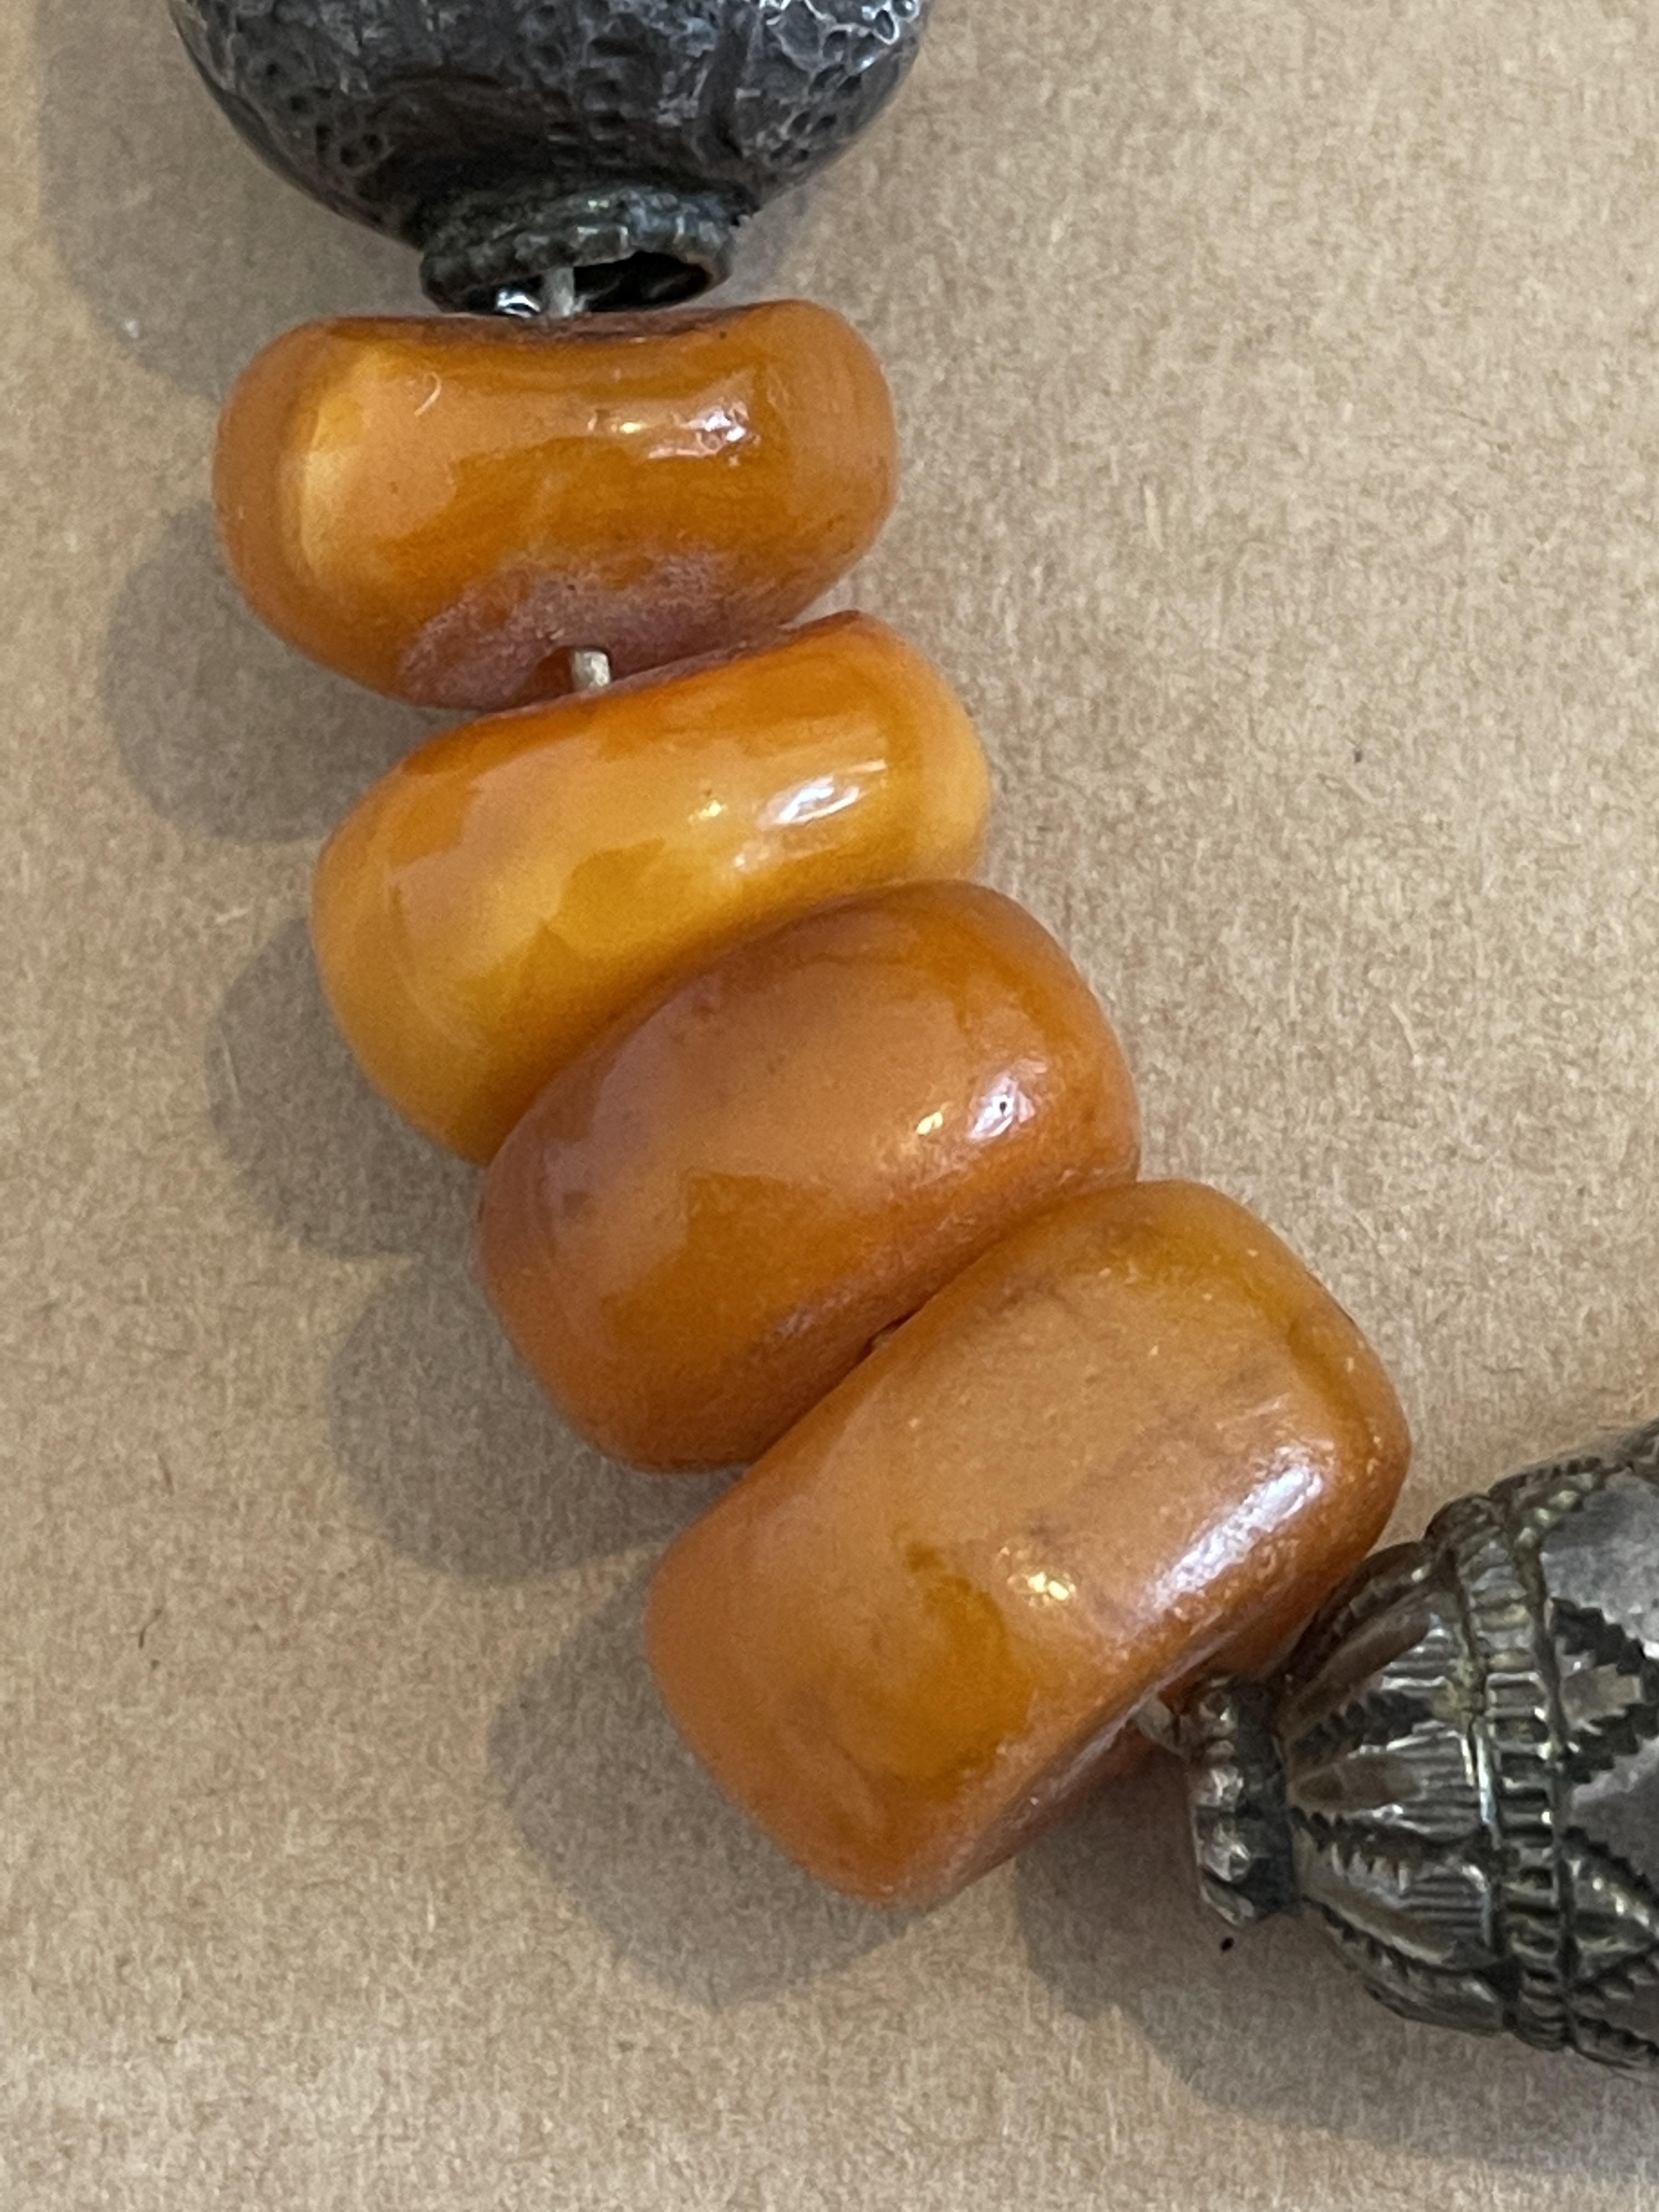 Antique Ethnic Berber? Silver and Amber/Bakelite Necklace - 49cm long - 104 grams. - Image 3 of 12